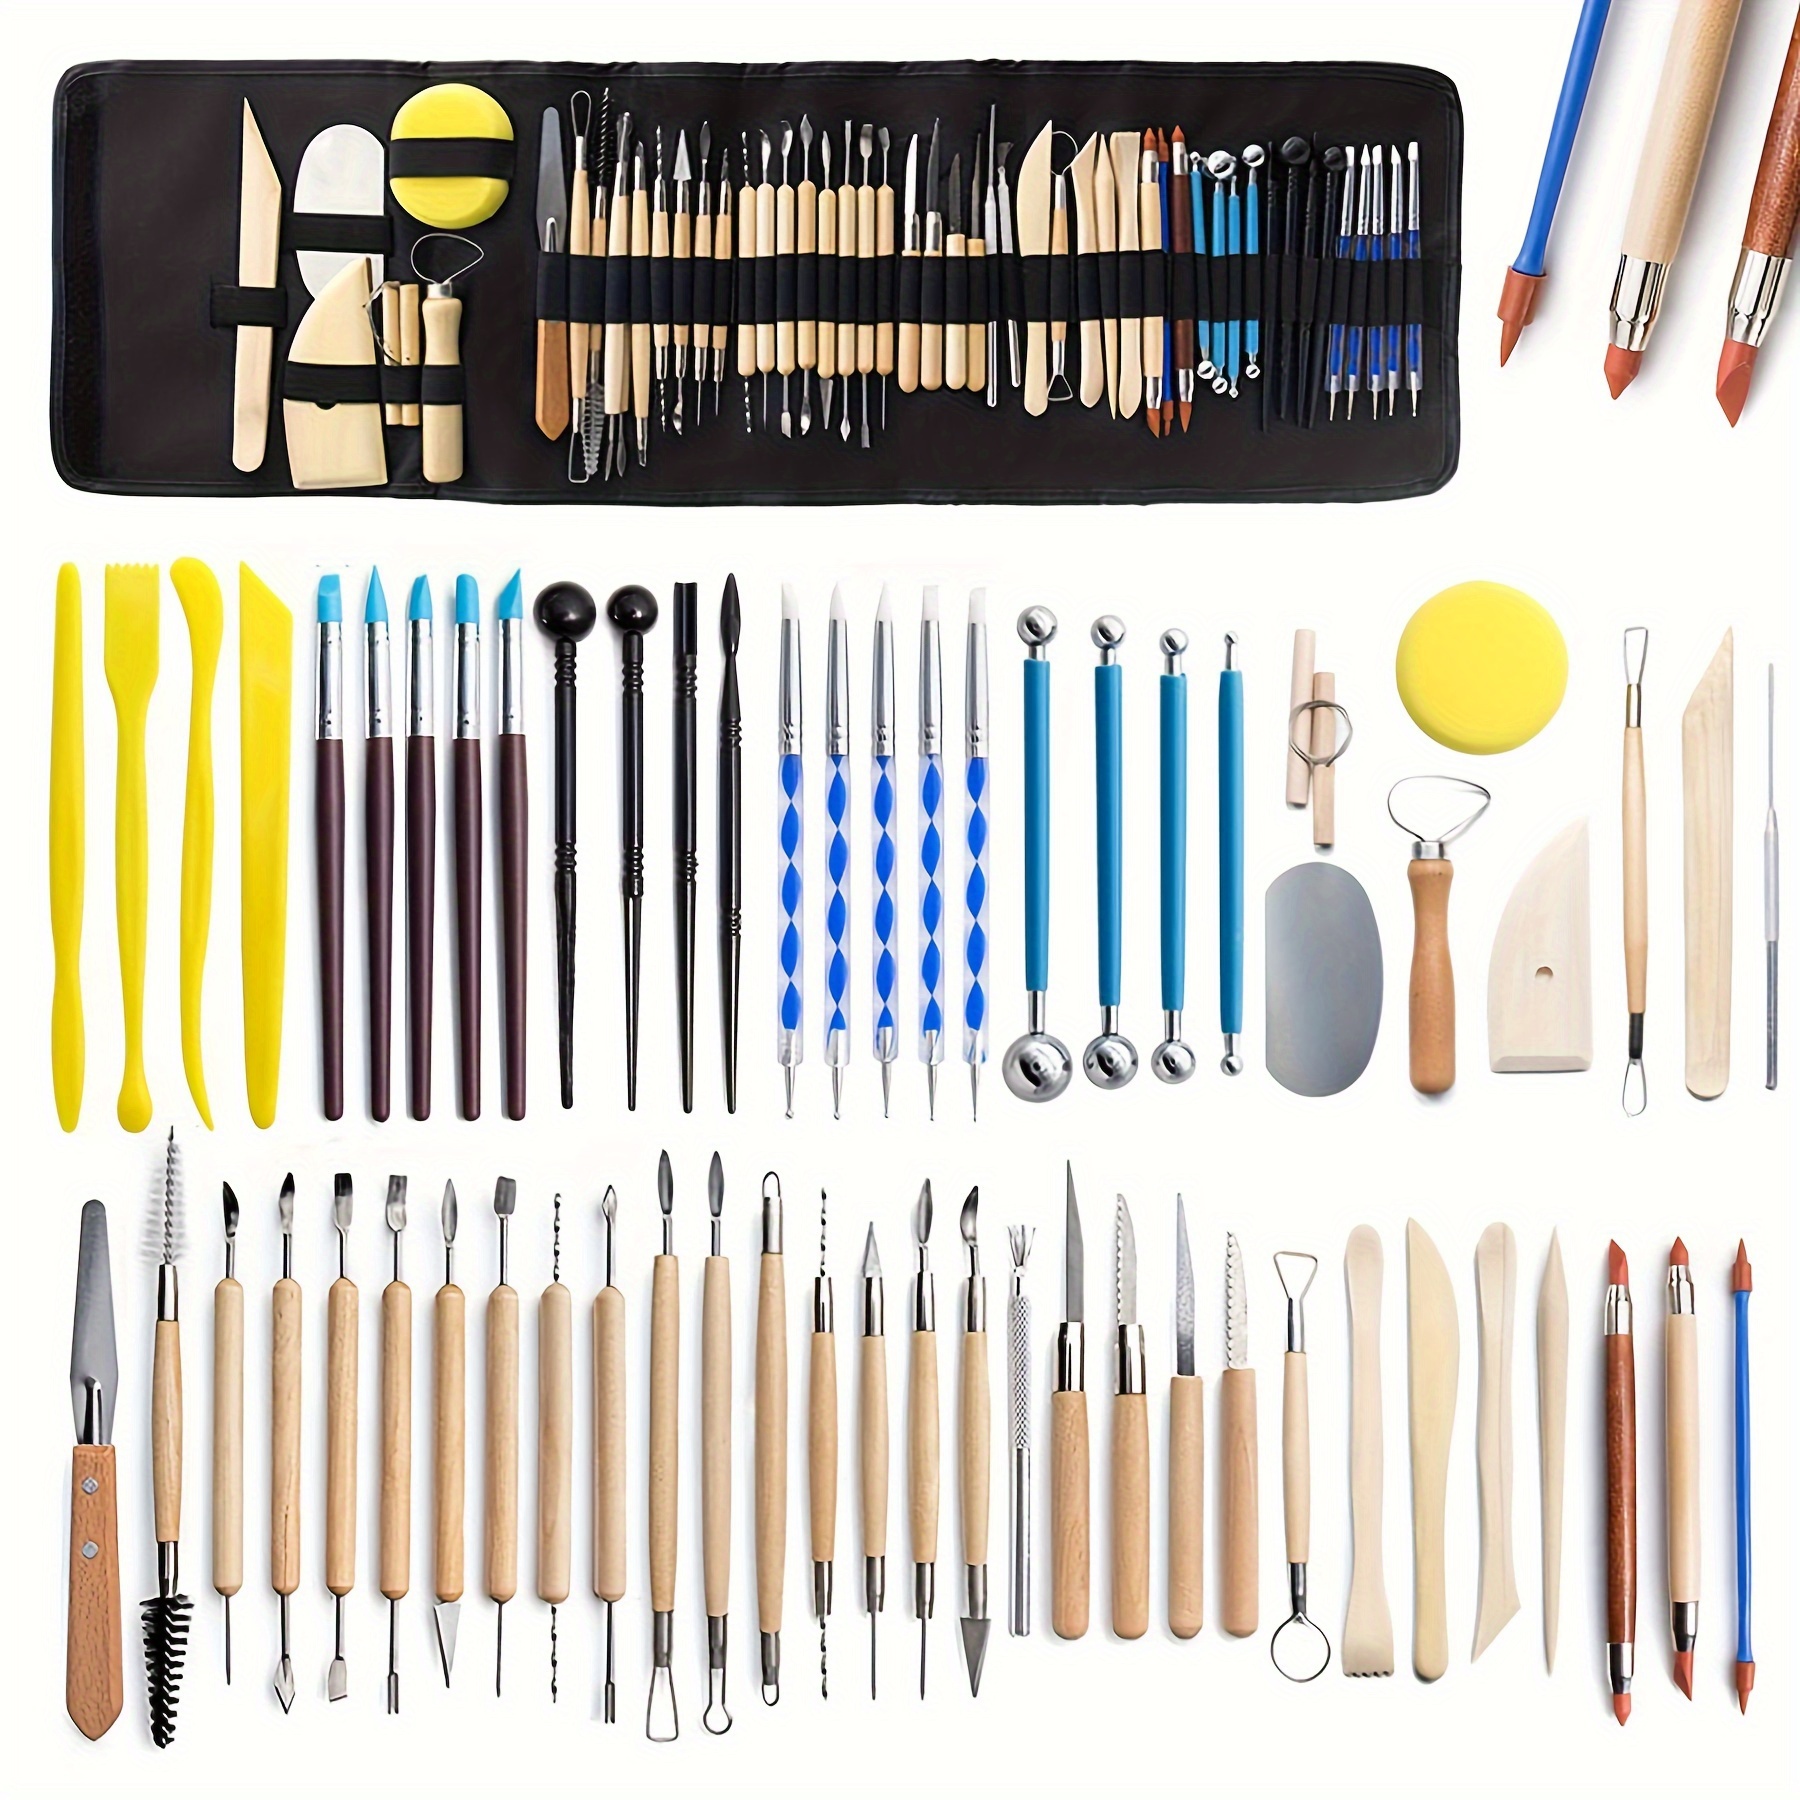 

61pcs Ceramics Clay Sculpture Polymer Tool Set Beginner's Craft Sculpting Pottery Modeling Carving Smoothing Wax Kit